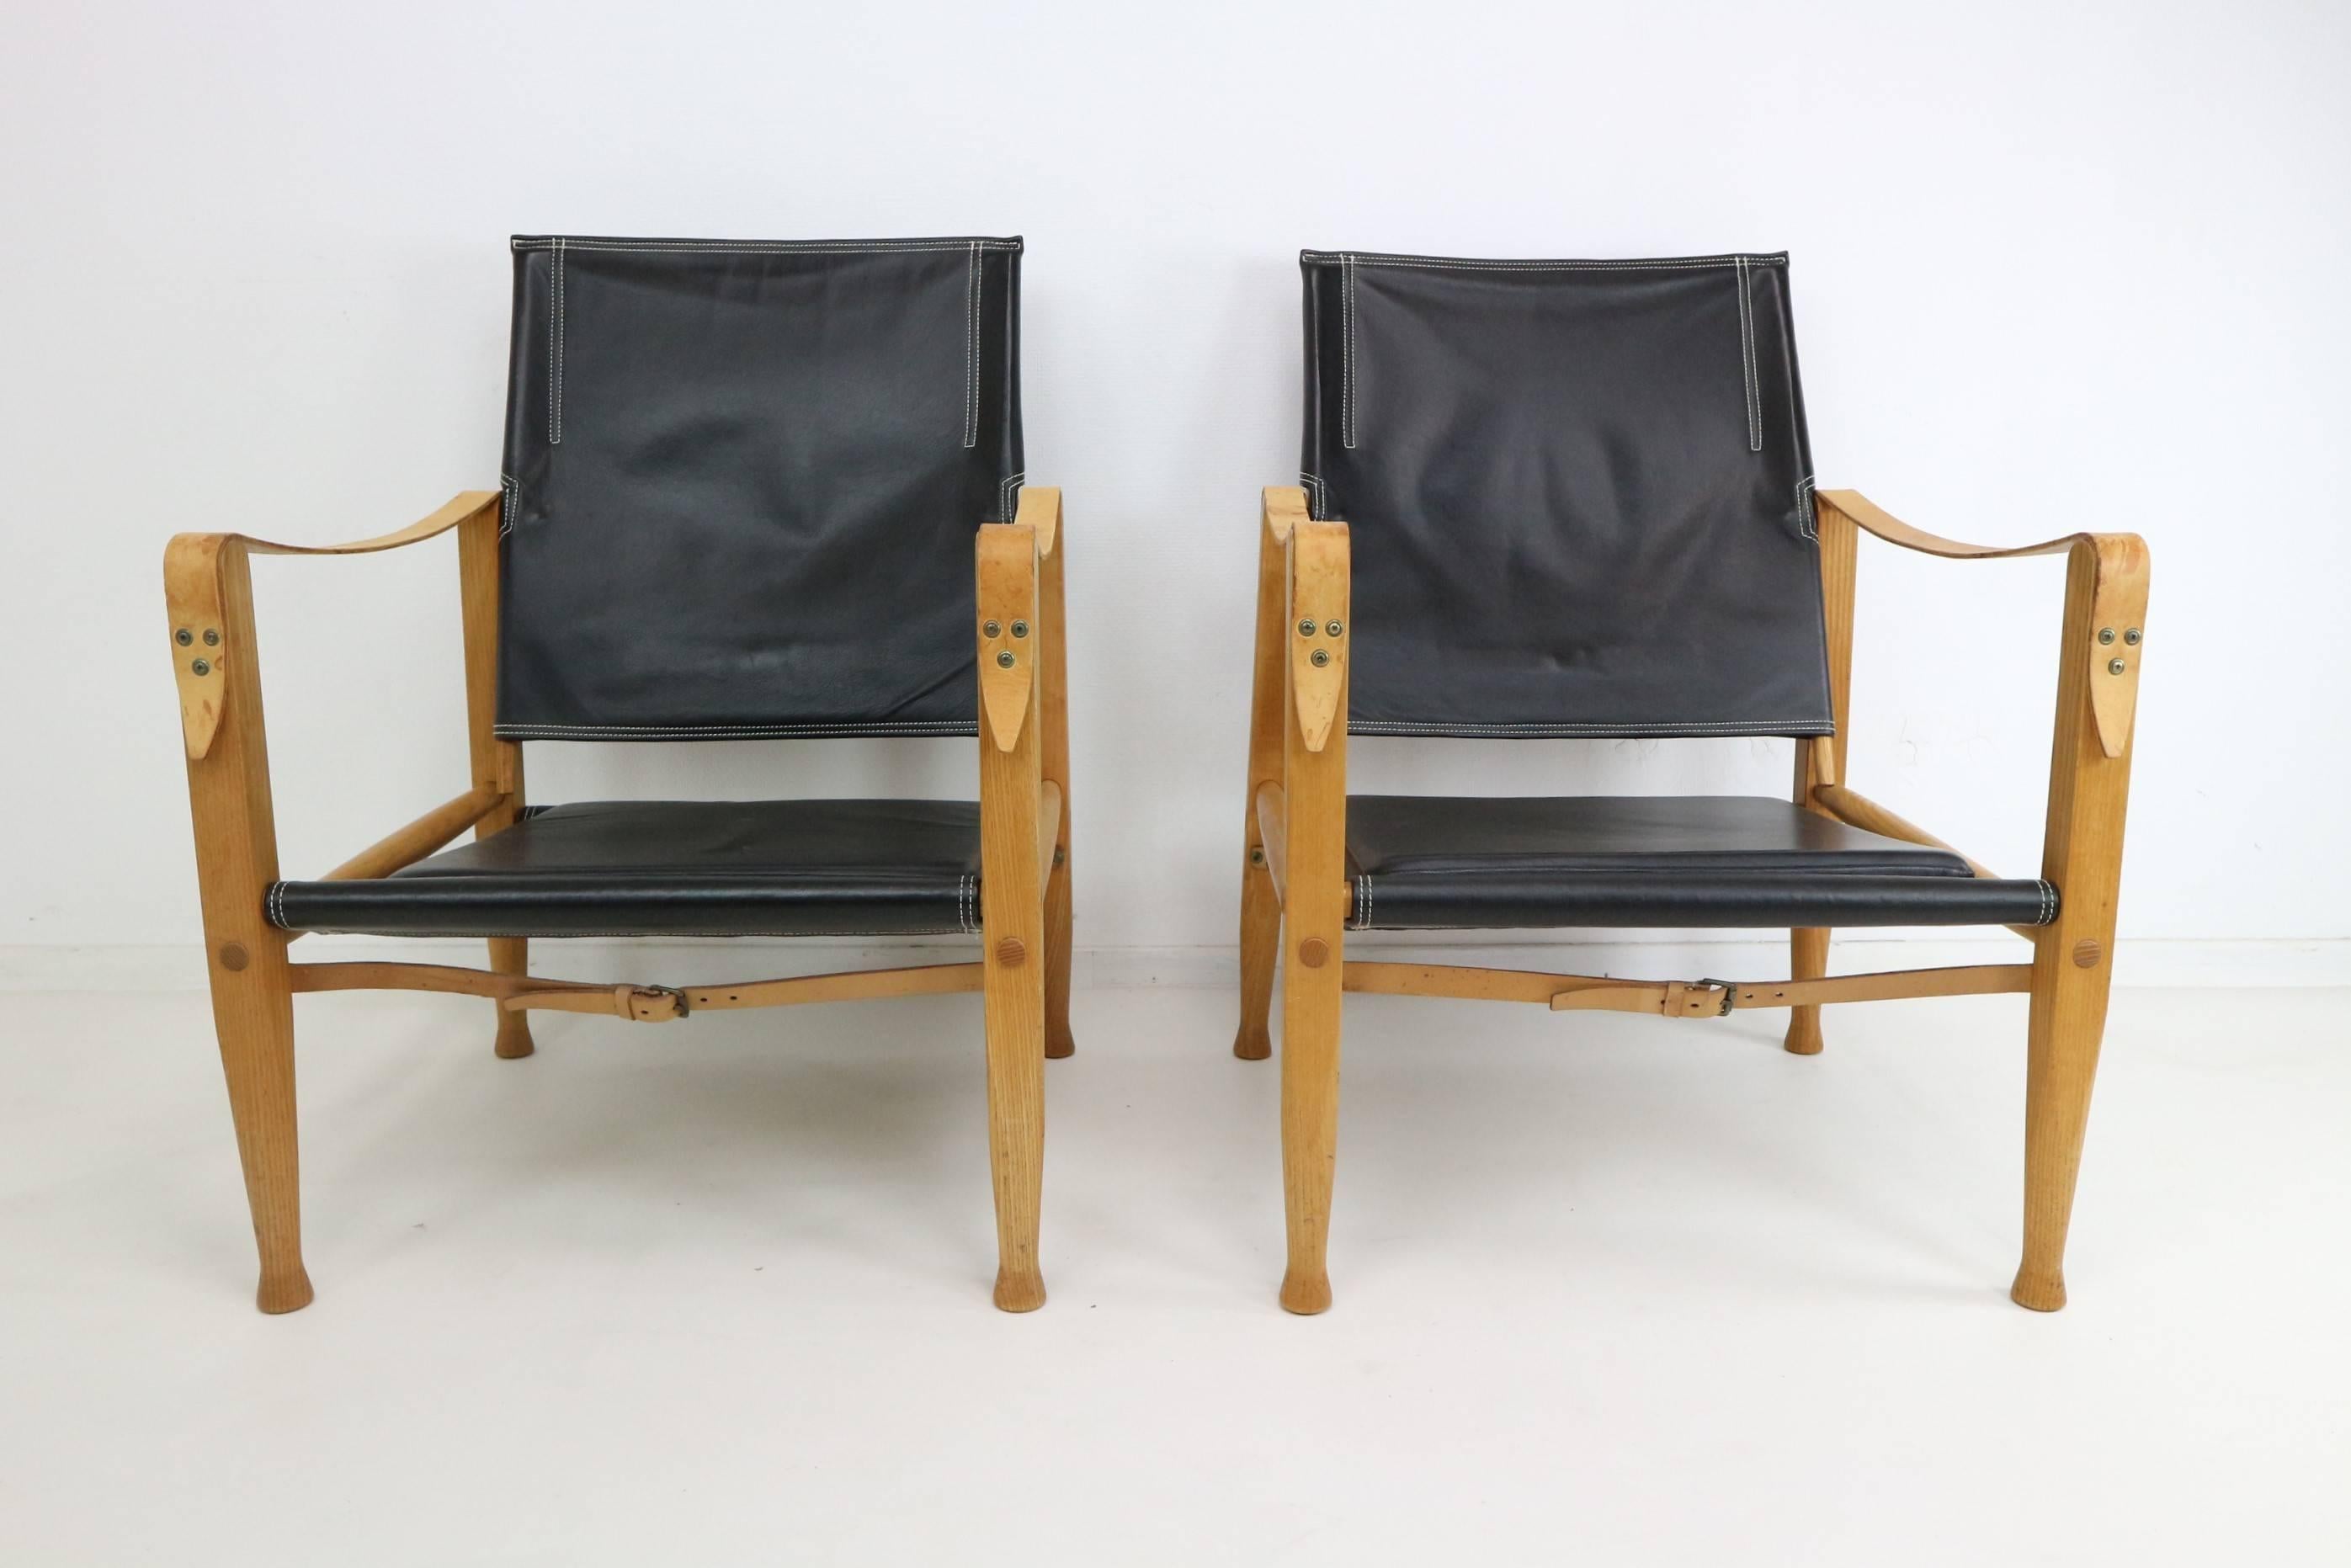 The original Danish safari chair by Kaare Klint for Rud. Rasmussen.

First produced in 1933, this pair were made in the 1950s from strikingly grained ashwood.

With black leather seat, backrest and cushion, tan leather straps and brass details.

It